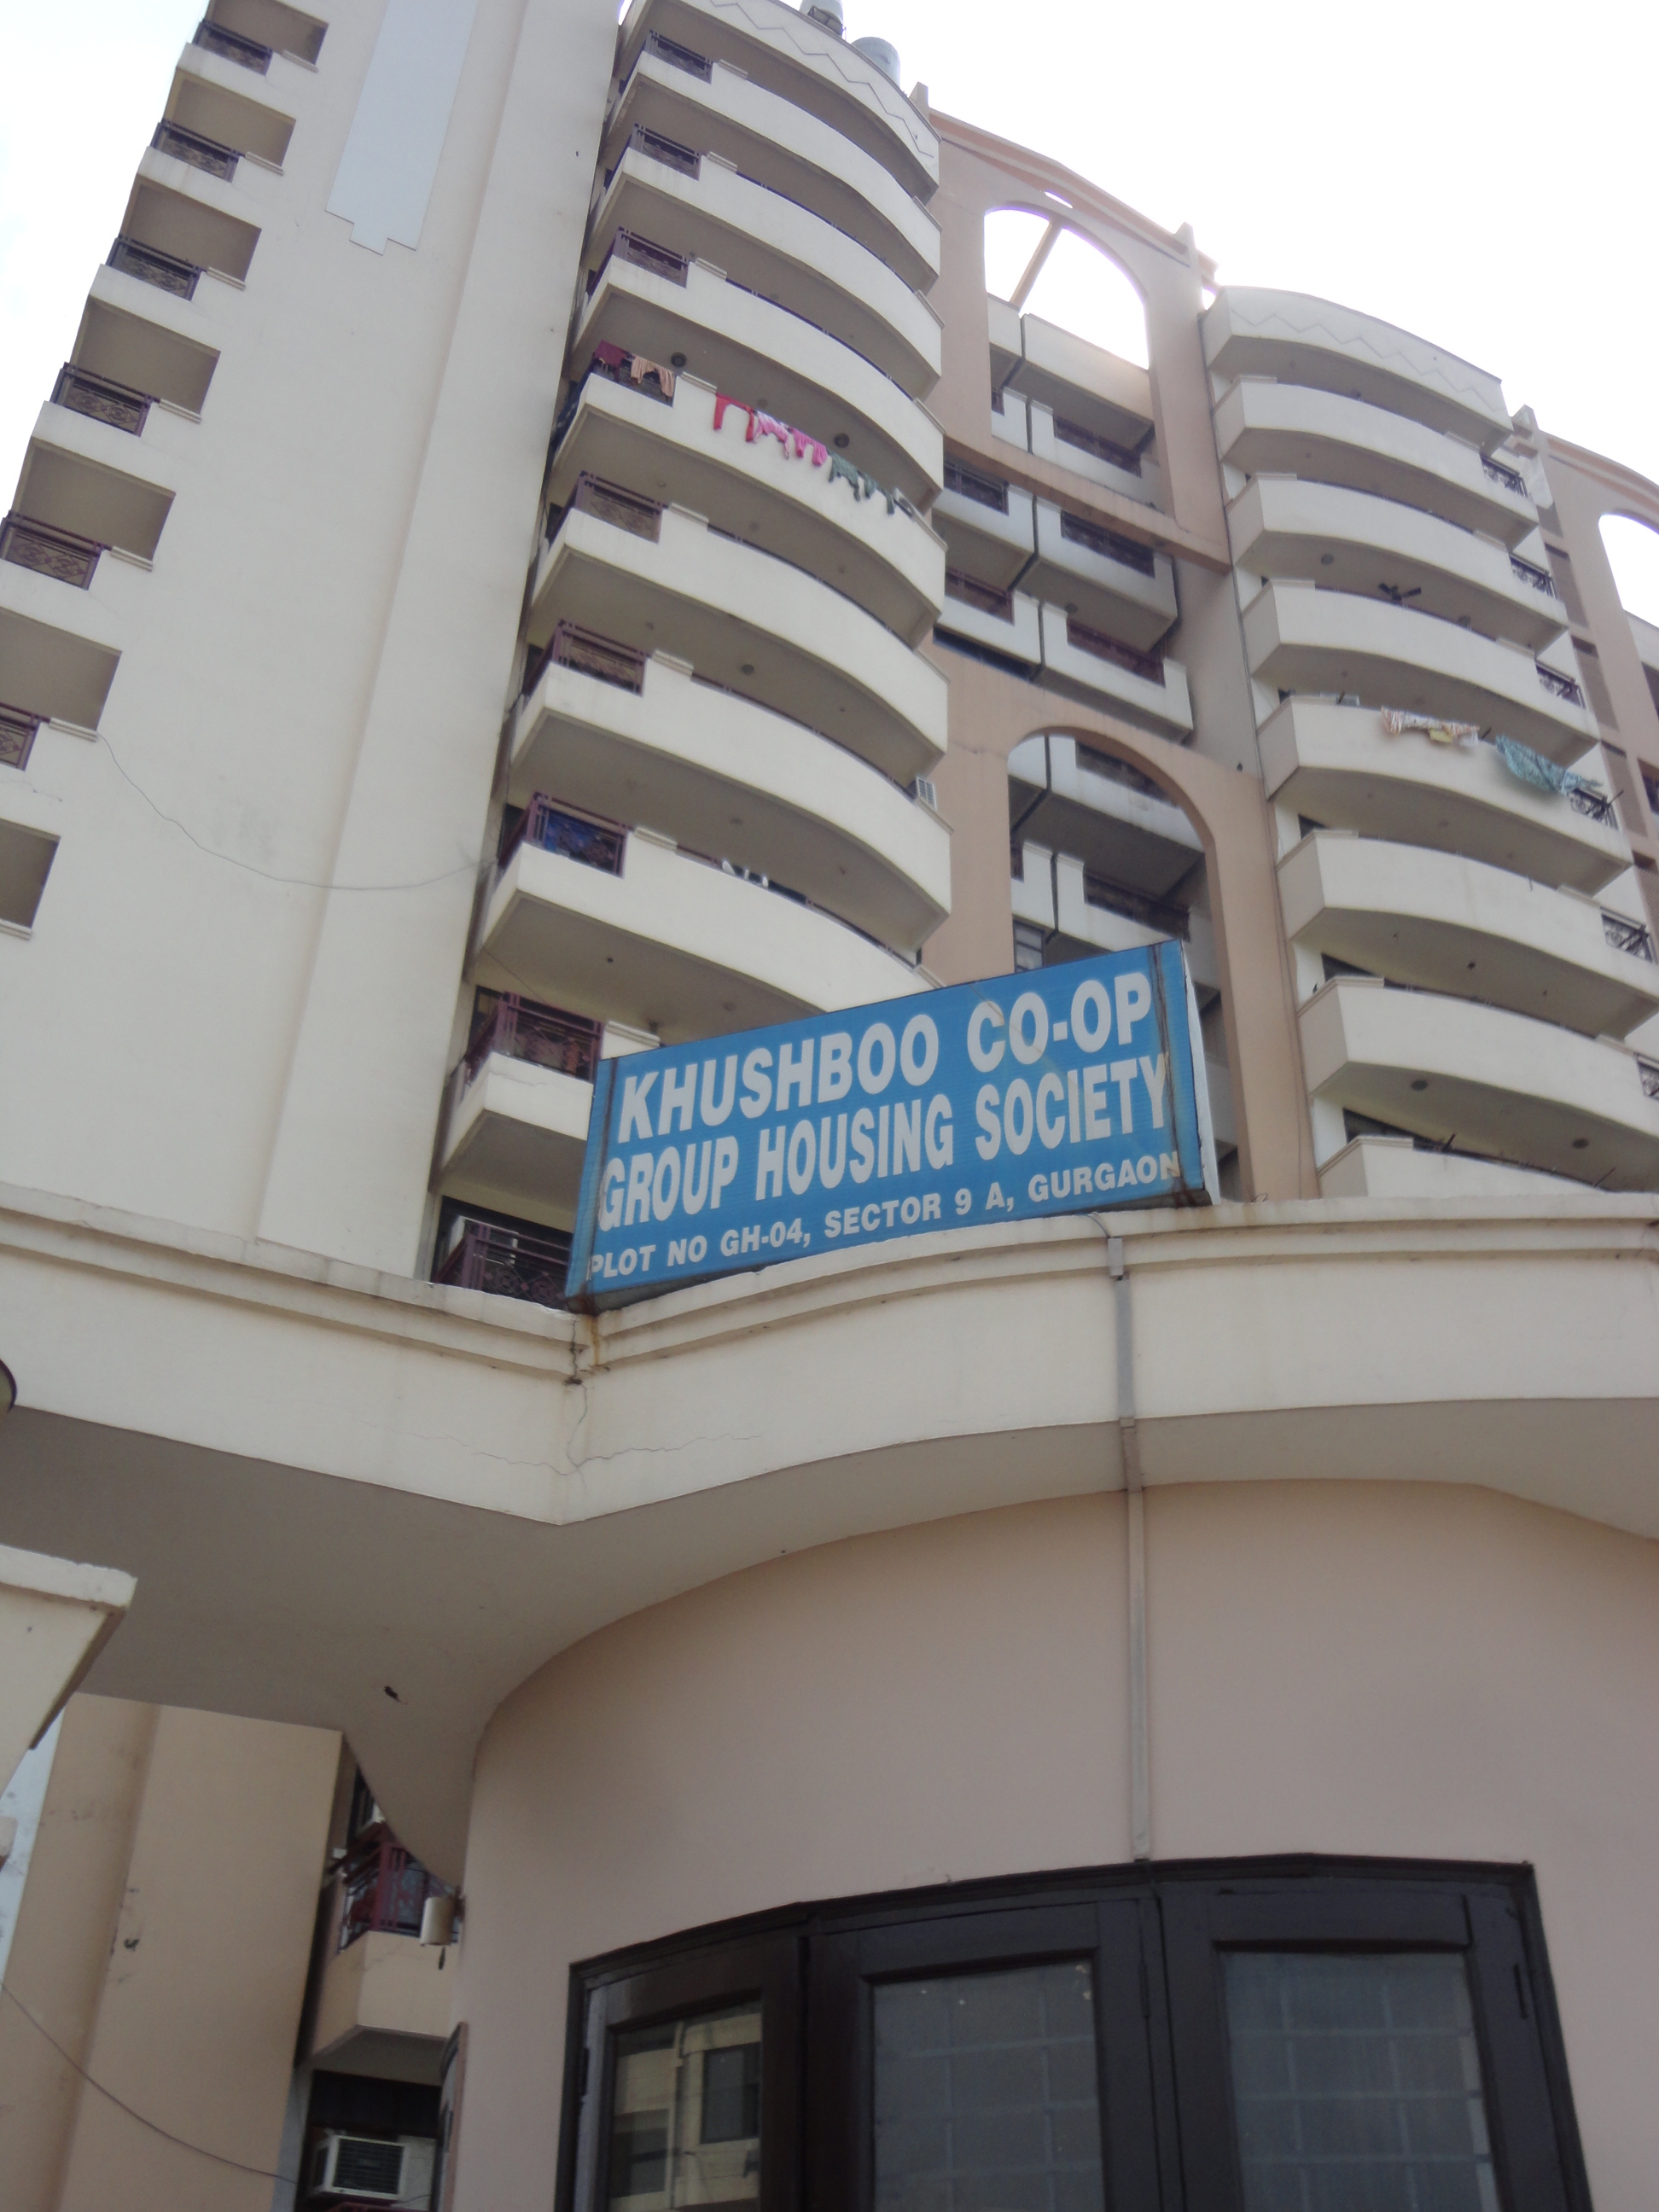 Khushboo Apartments CGHS Project Deails